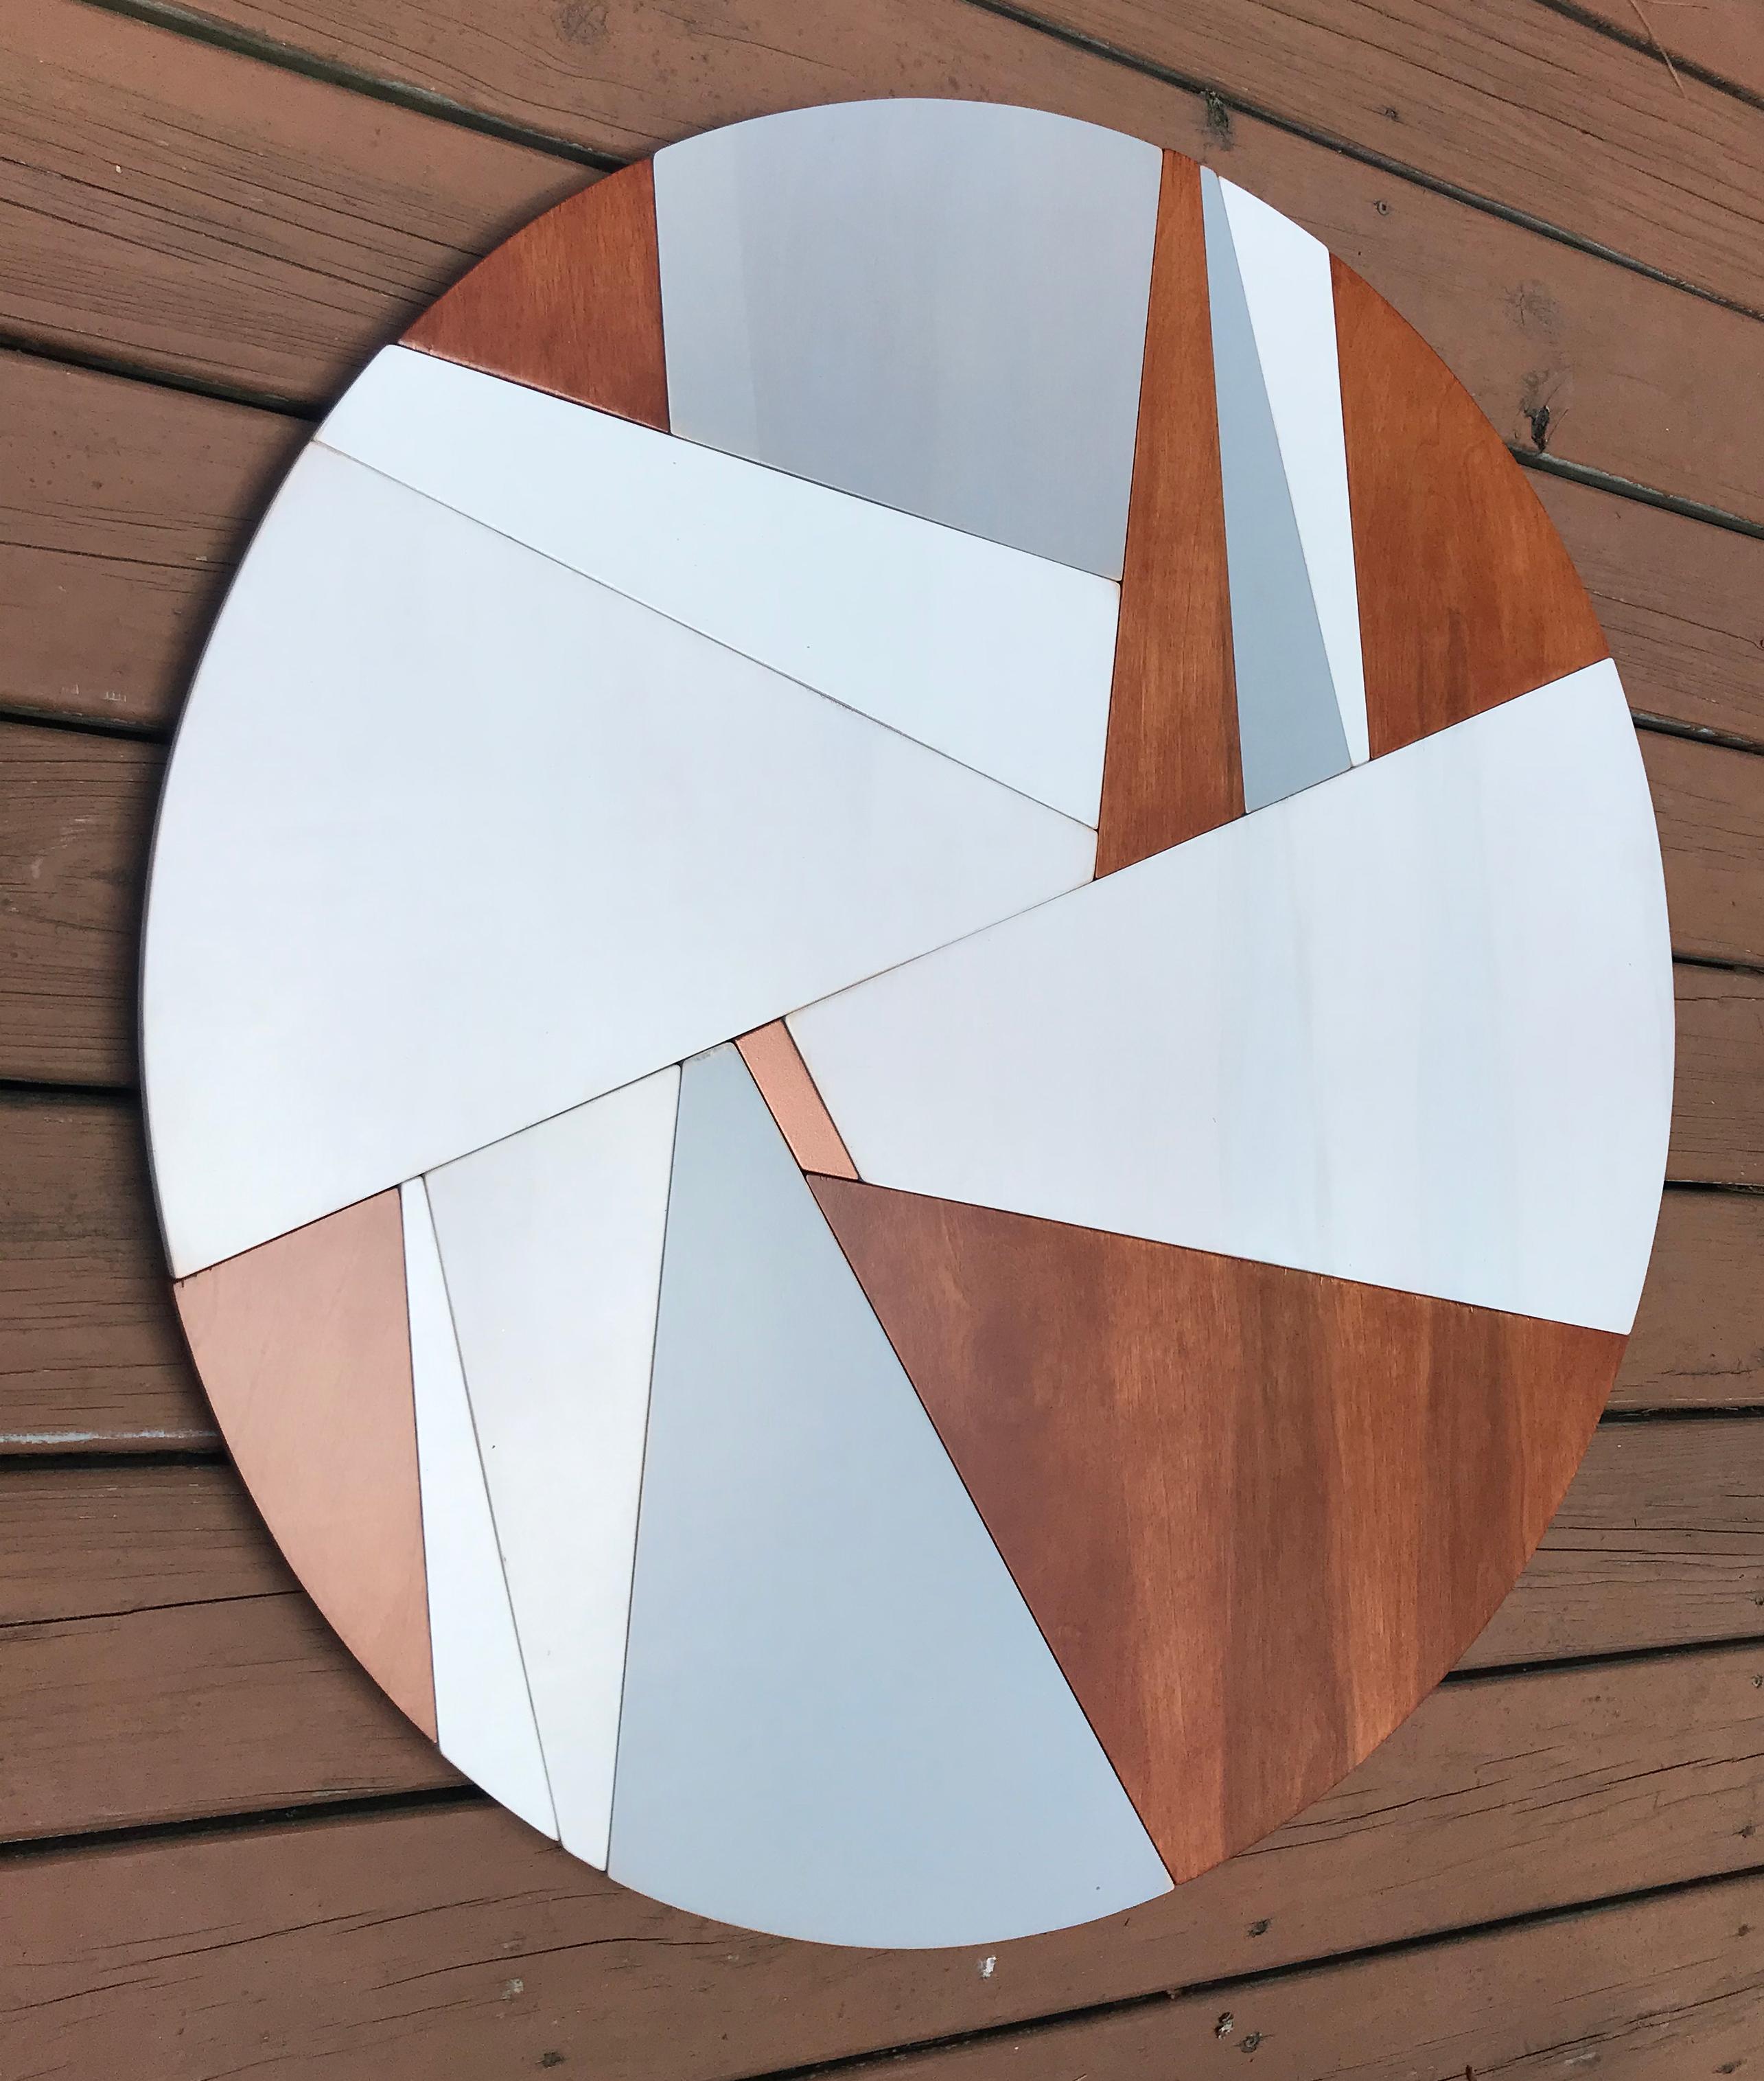 Holocene 2 is an elegant modern minimalist contemporary wall sculpture. It is constructed
with birch panels, acrylic and latex washes and copper metallic enamel with a satin
lacquer clear coat finish. It is completed with a gray MDF backer. The